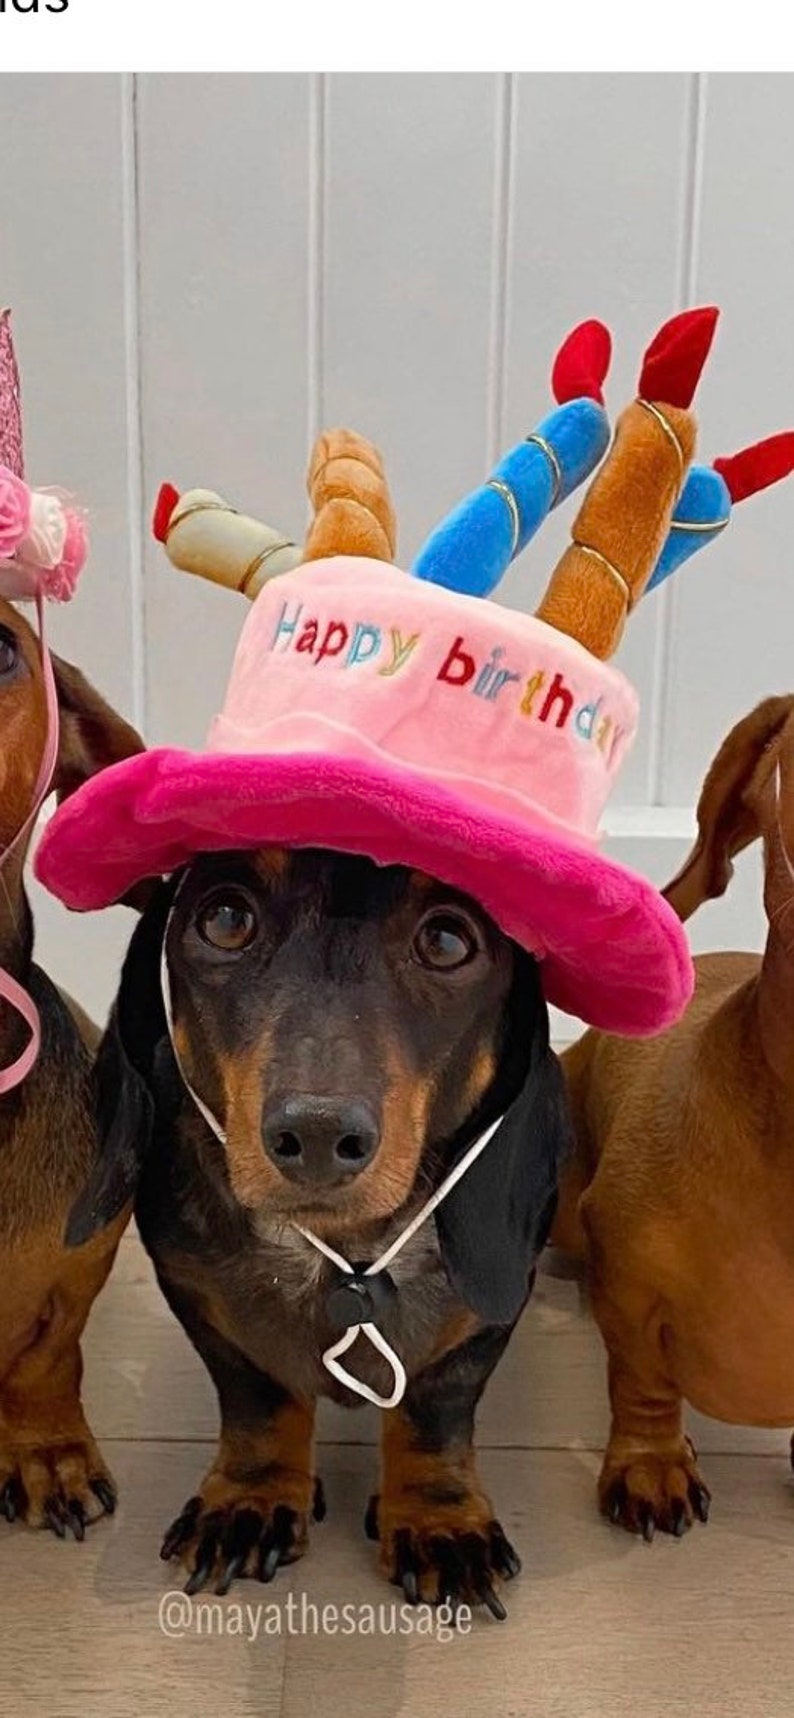 HAPPY BIRTHDAY HAT Blue and Pink options with candles fun birthday hat for your cat/dog/puppy image 3